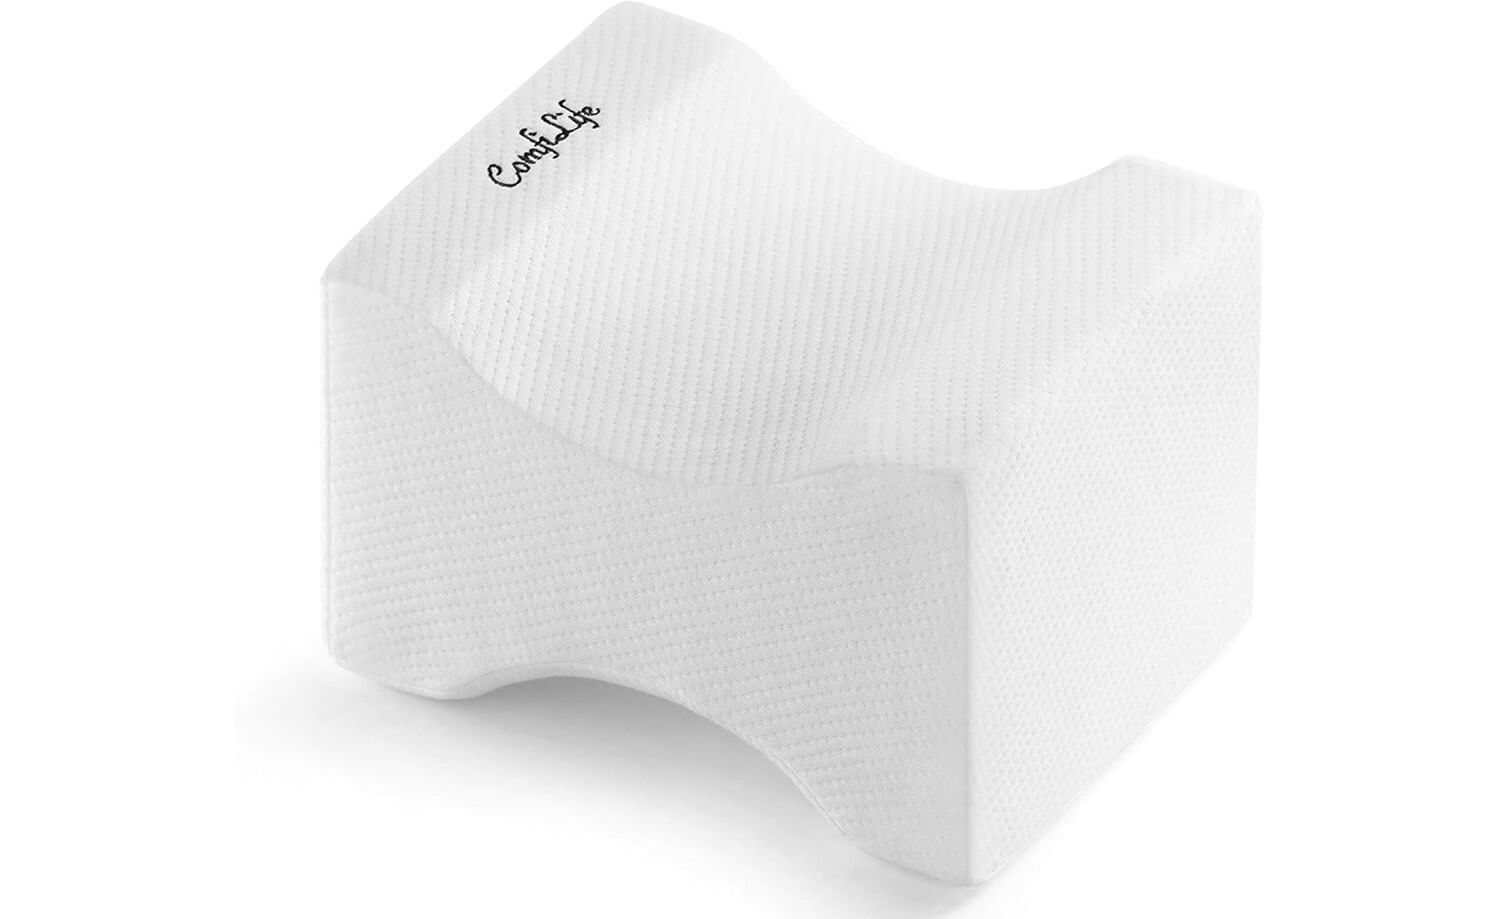 https://comfilife.com/wp-content/uploads/2021/01/ComfiLife-Orthopedic-Knee-Pillow-for-Sciatica-Relief-Back-Pain-Leg-Pain-Pregnancy-Hip-and-Joint-Pain_01_manual.jpg